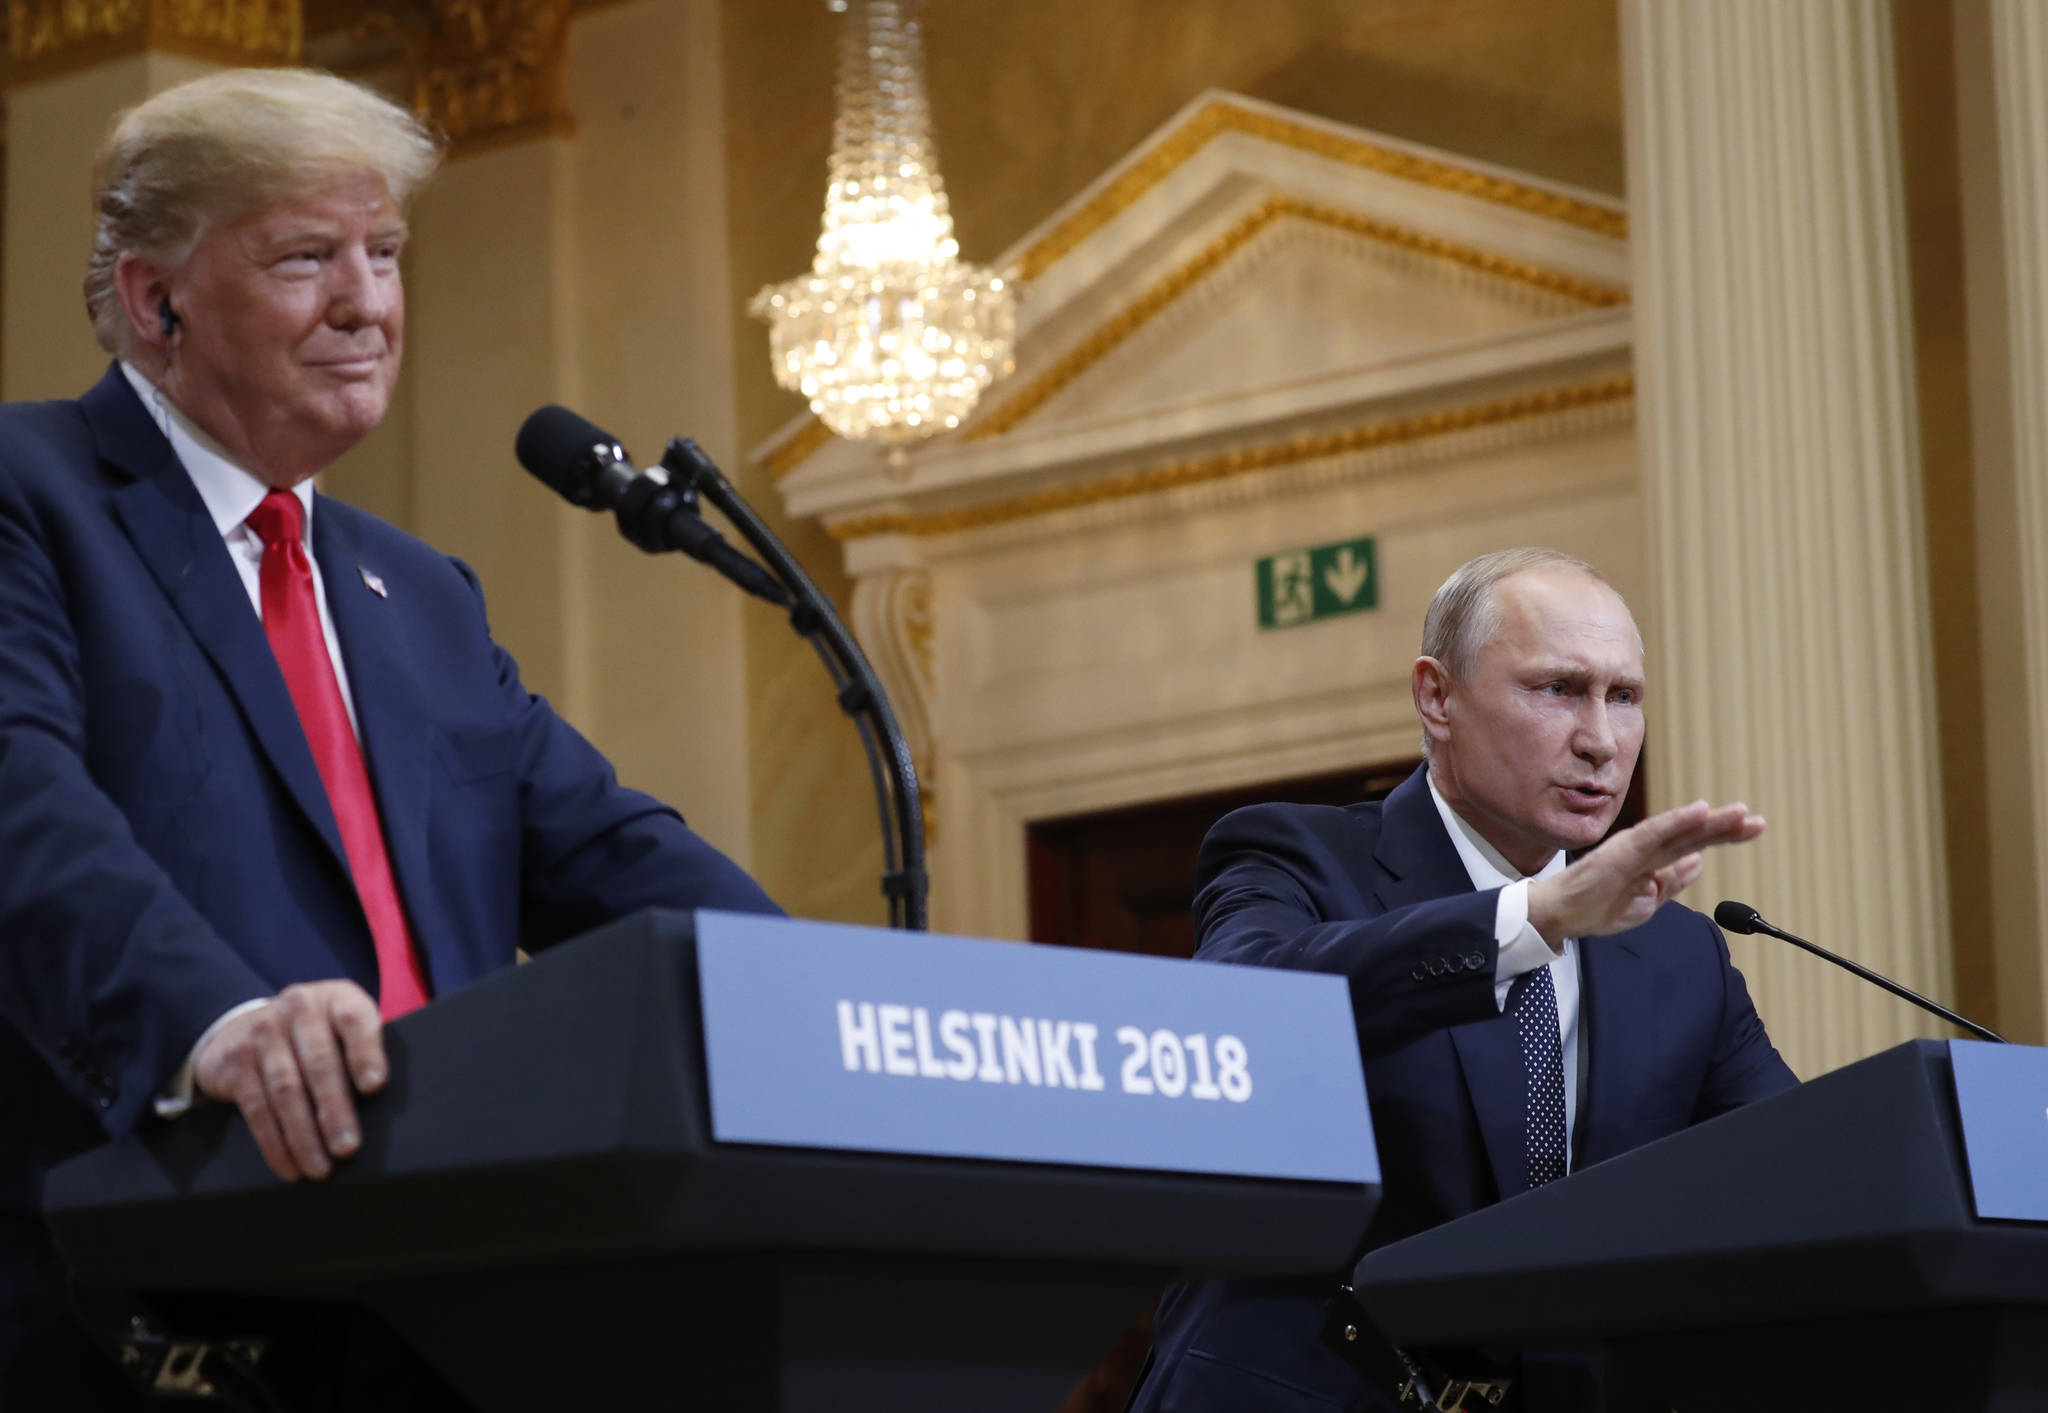 U.S. President Donald Trump, left, listens to Russian President Vladimir Putin during a press conference after their meeting at the Presidential Palace in Helsinki, Finland, Monday, July 16, 2018. (AP Photo/Pablo Martinez Monsivais)